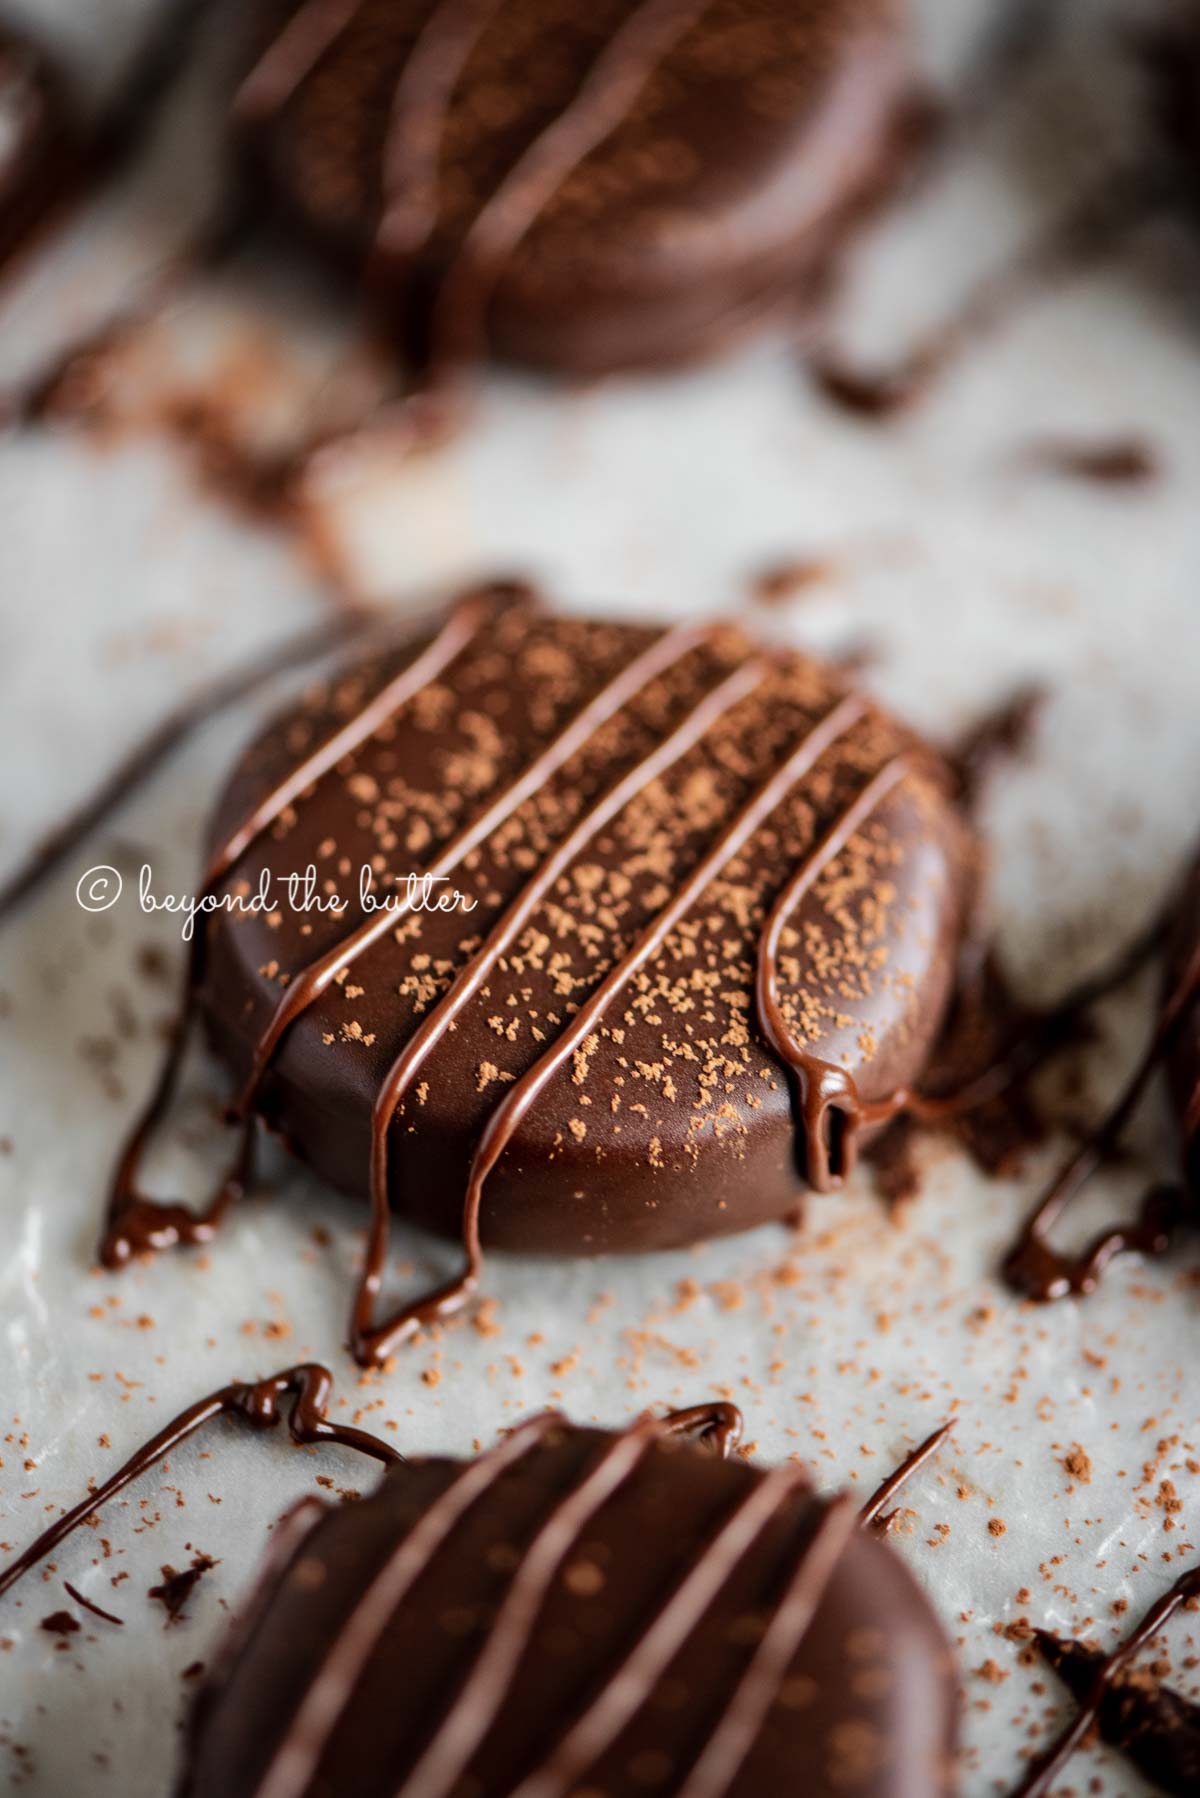 Closeup of homemade peppermint patties on a parchment lined baking sheet sprinkled with cocoa and drizzled with melted chocolate | All Images © Beyond the Butter®